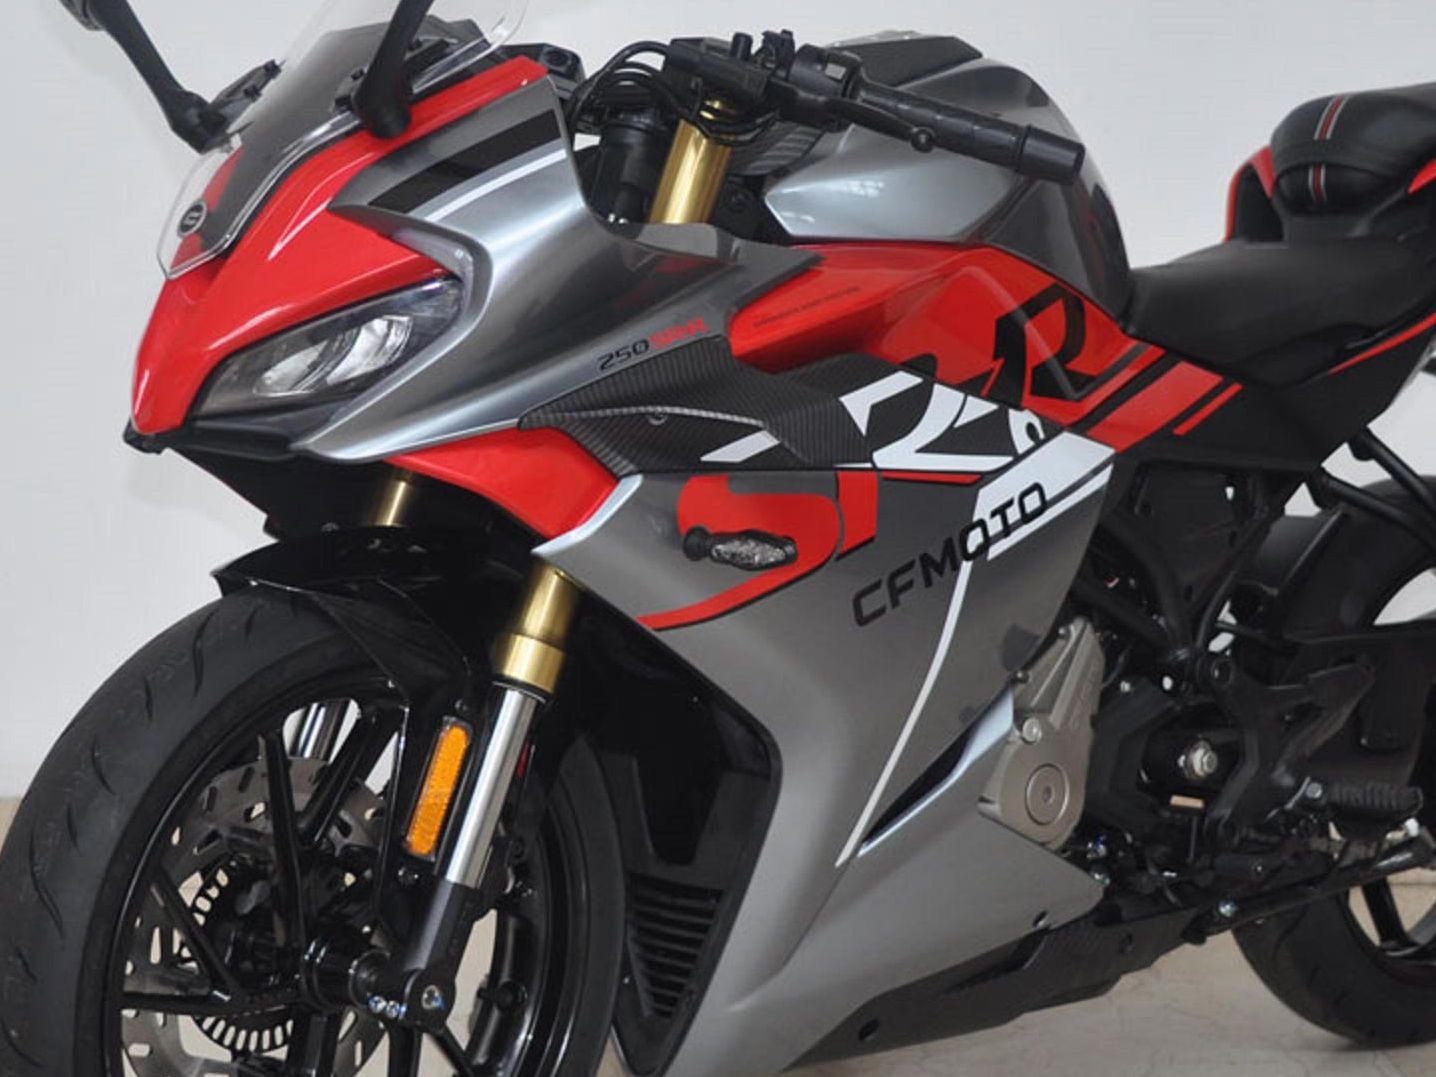 Cfmoto To Launch Sporty Single Cycle World